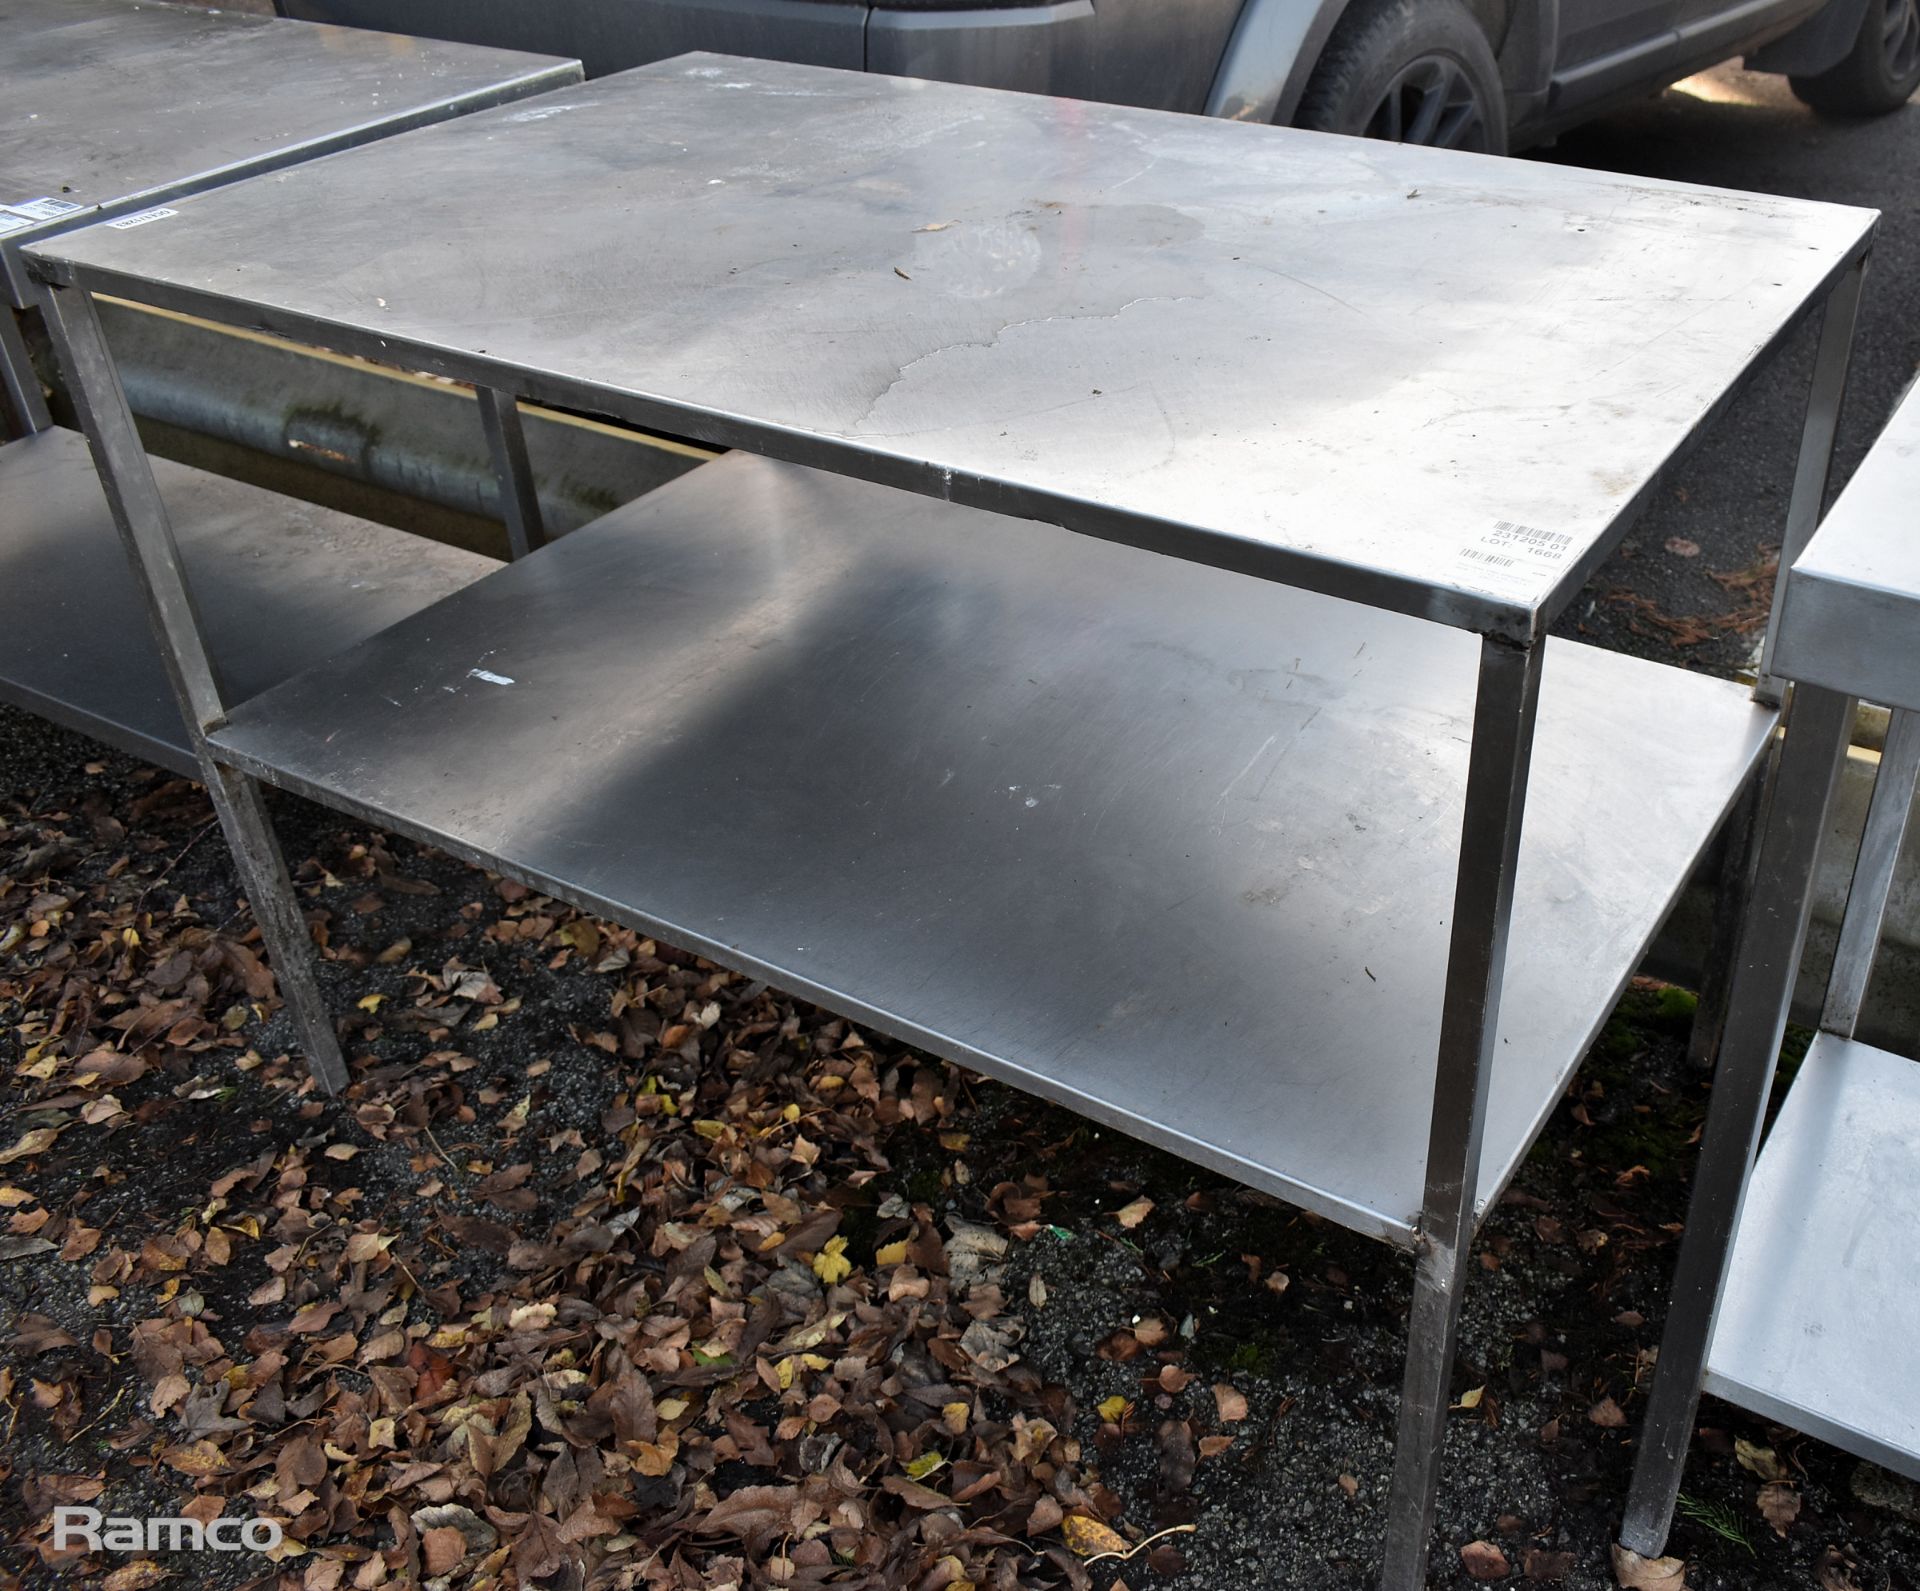 Stainless steel preparation table - L 1210 x W 760 x H 860mm - Image 3 of 3